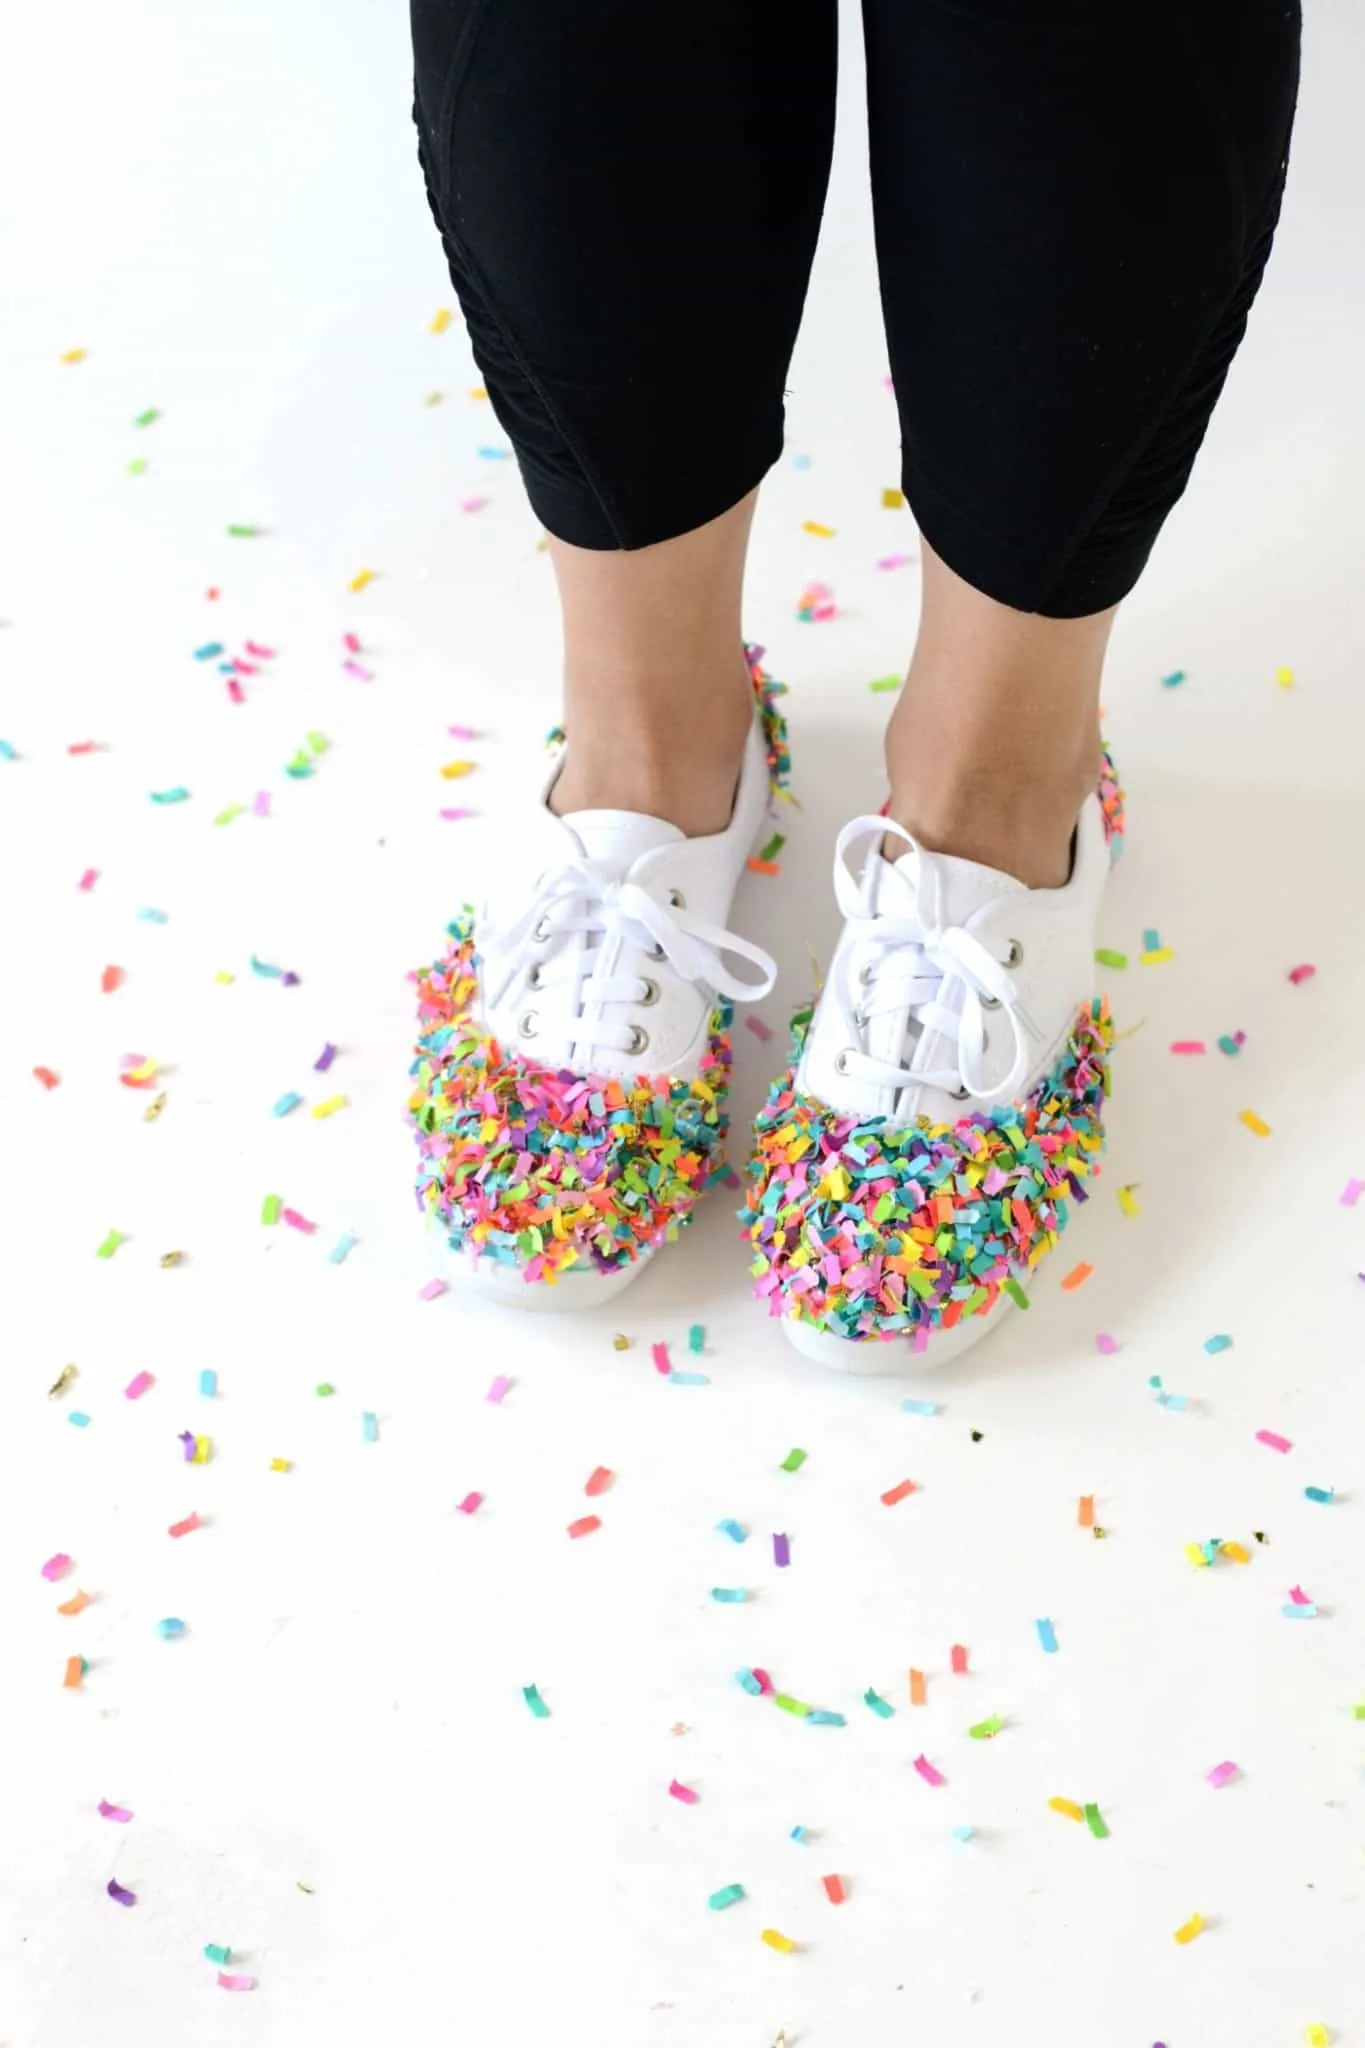 Woman wearing white tennis shoes covered in colorful confetti